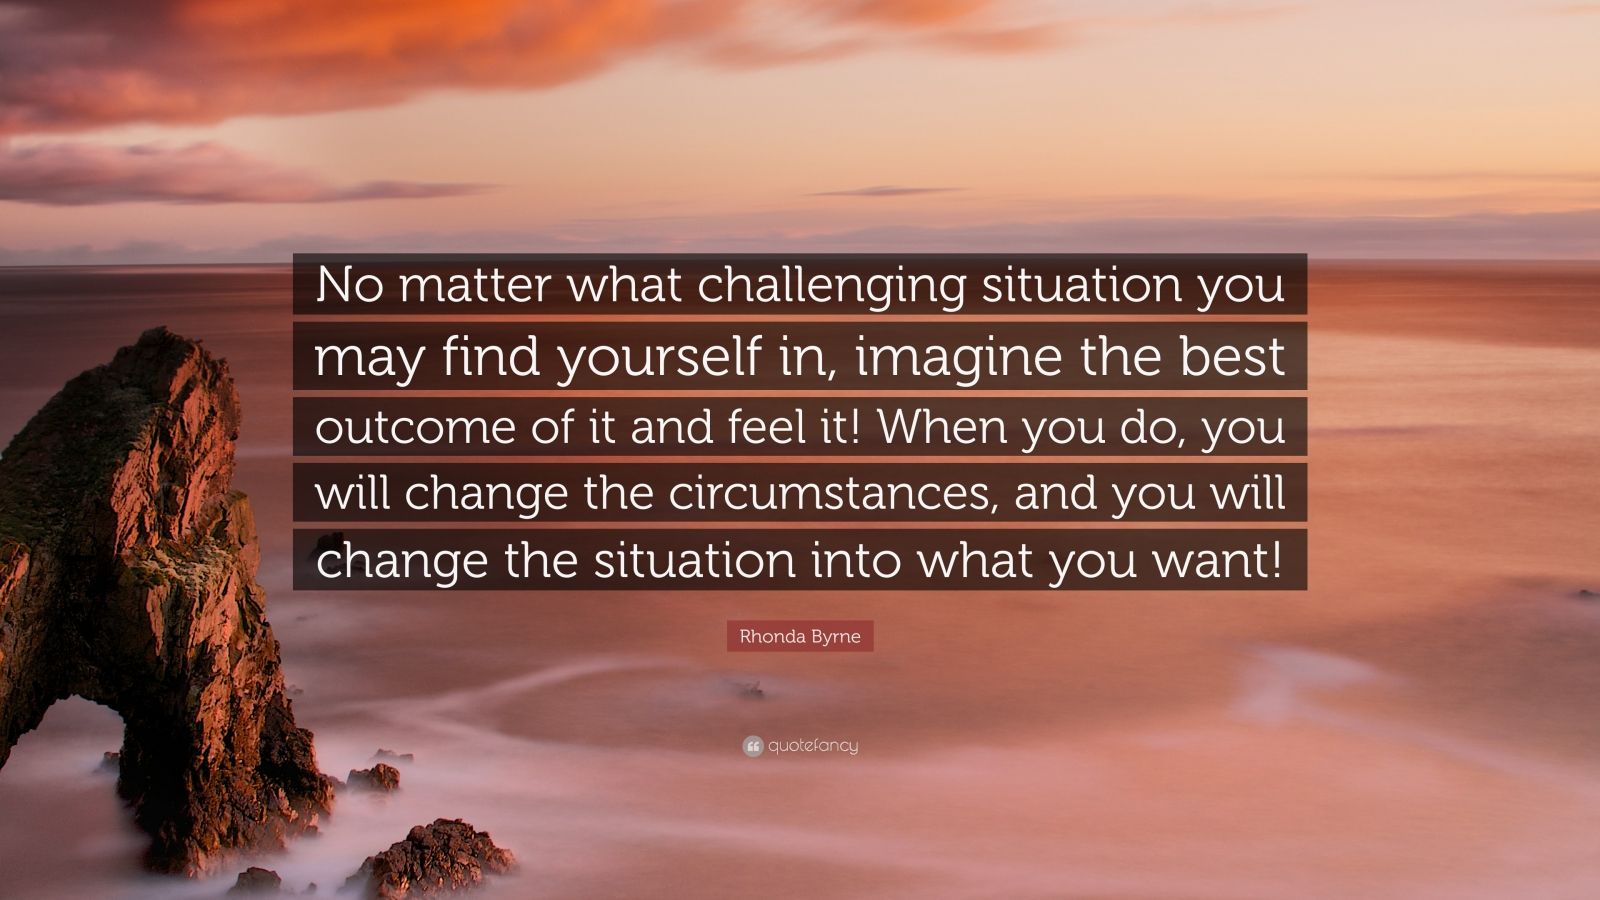 Rhonda Byrne Quote: “No matter what challenging situation you may find ...